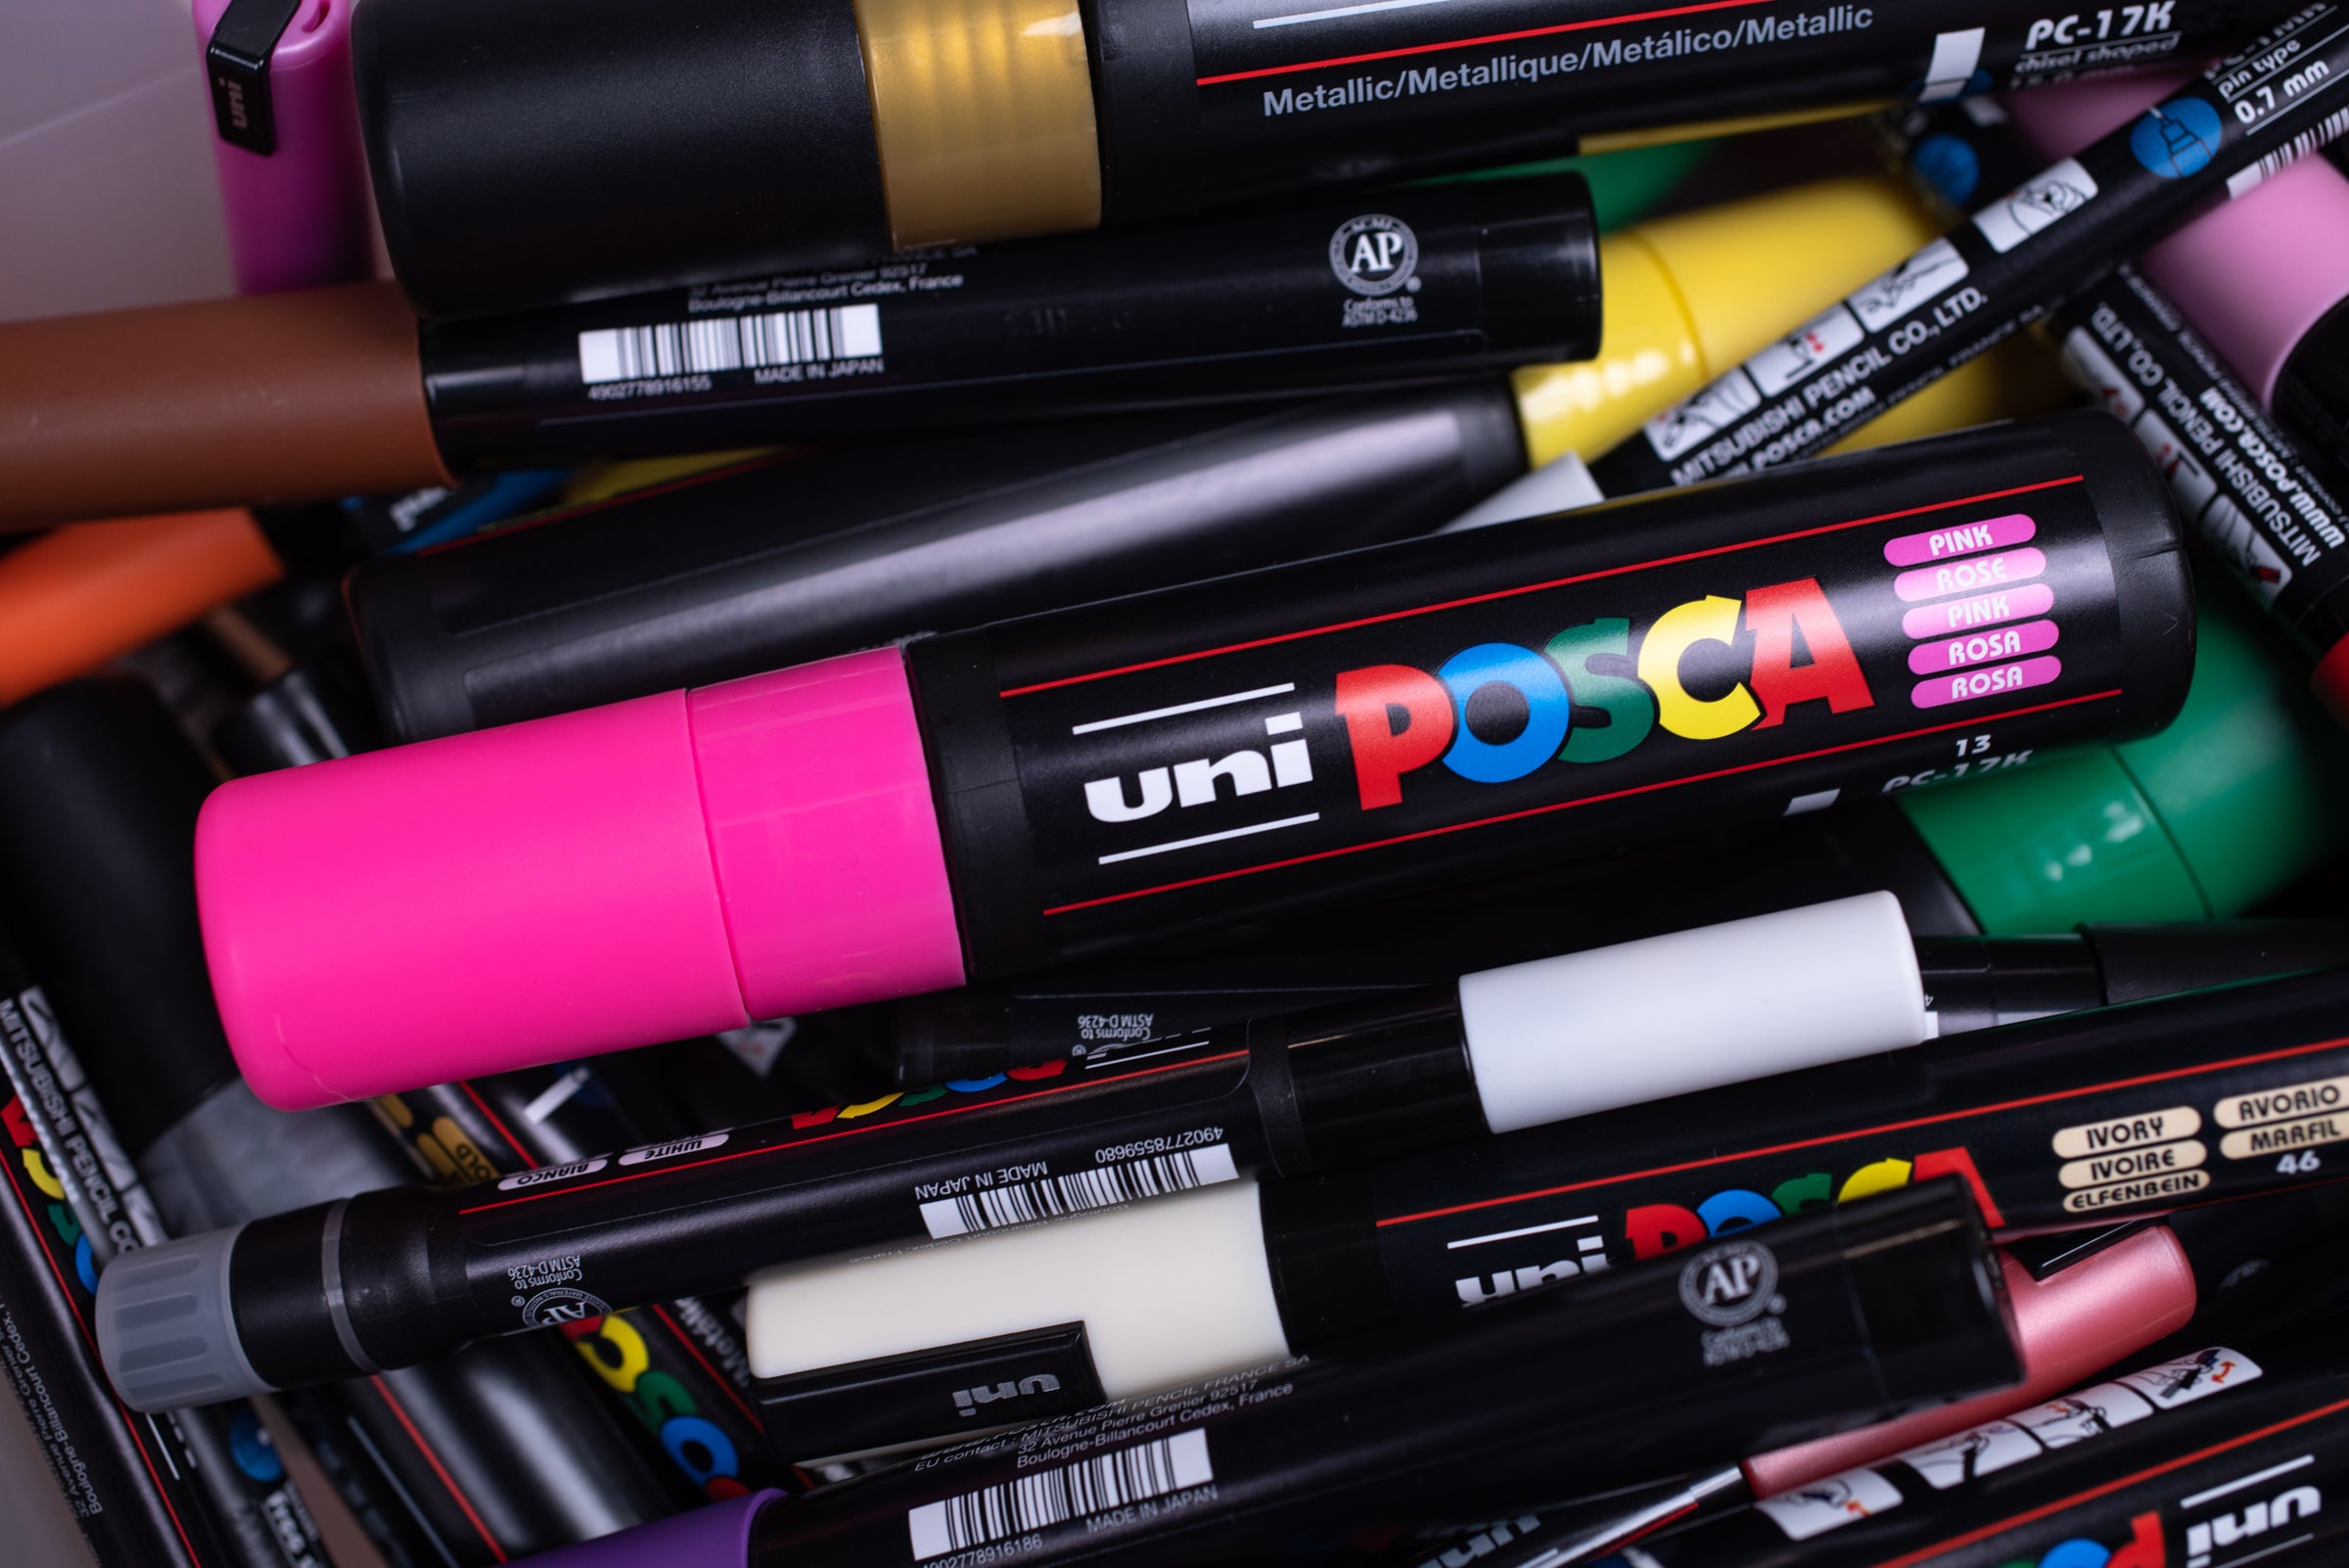 Is the Posca PCF-350 for you? If you're looking for a soft tip to add  detail this would be perfect for you! However if you want to cover…